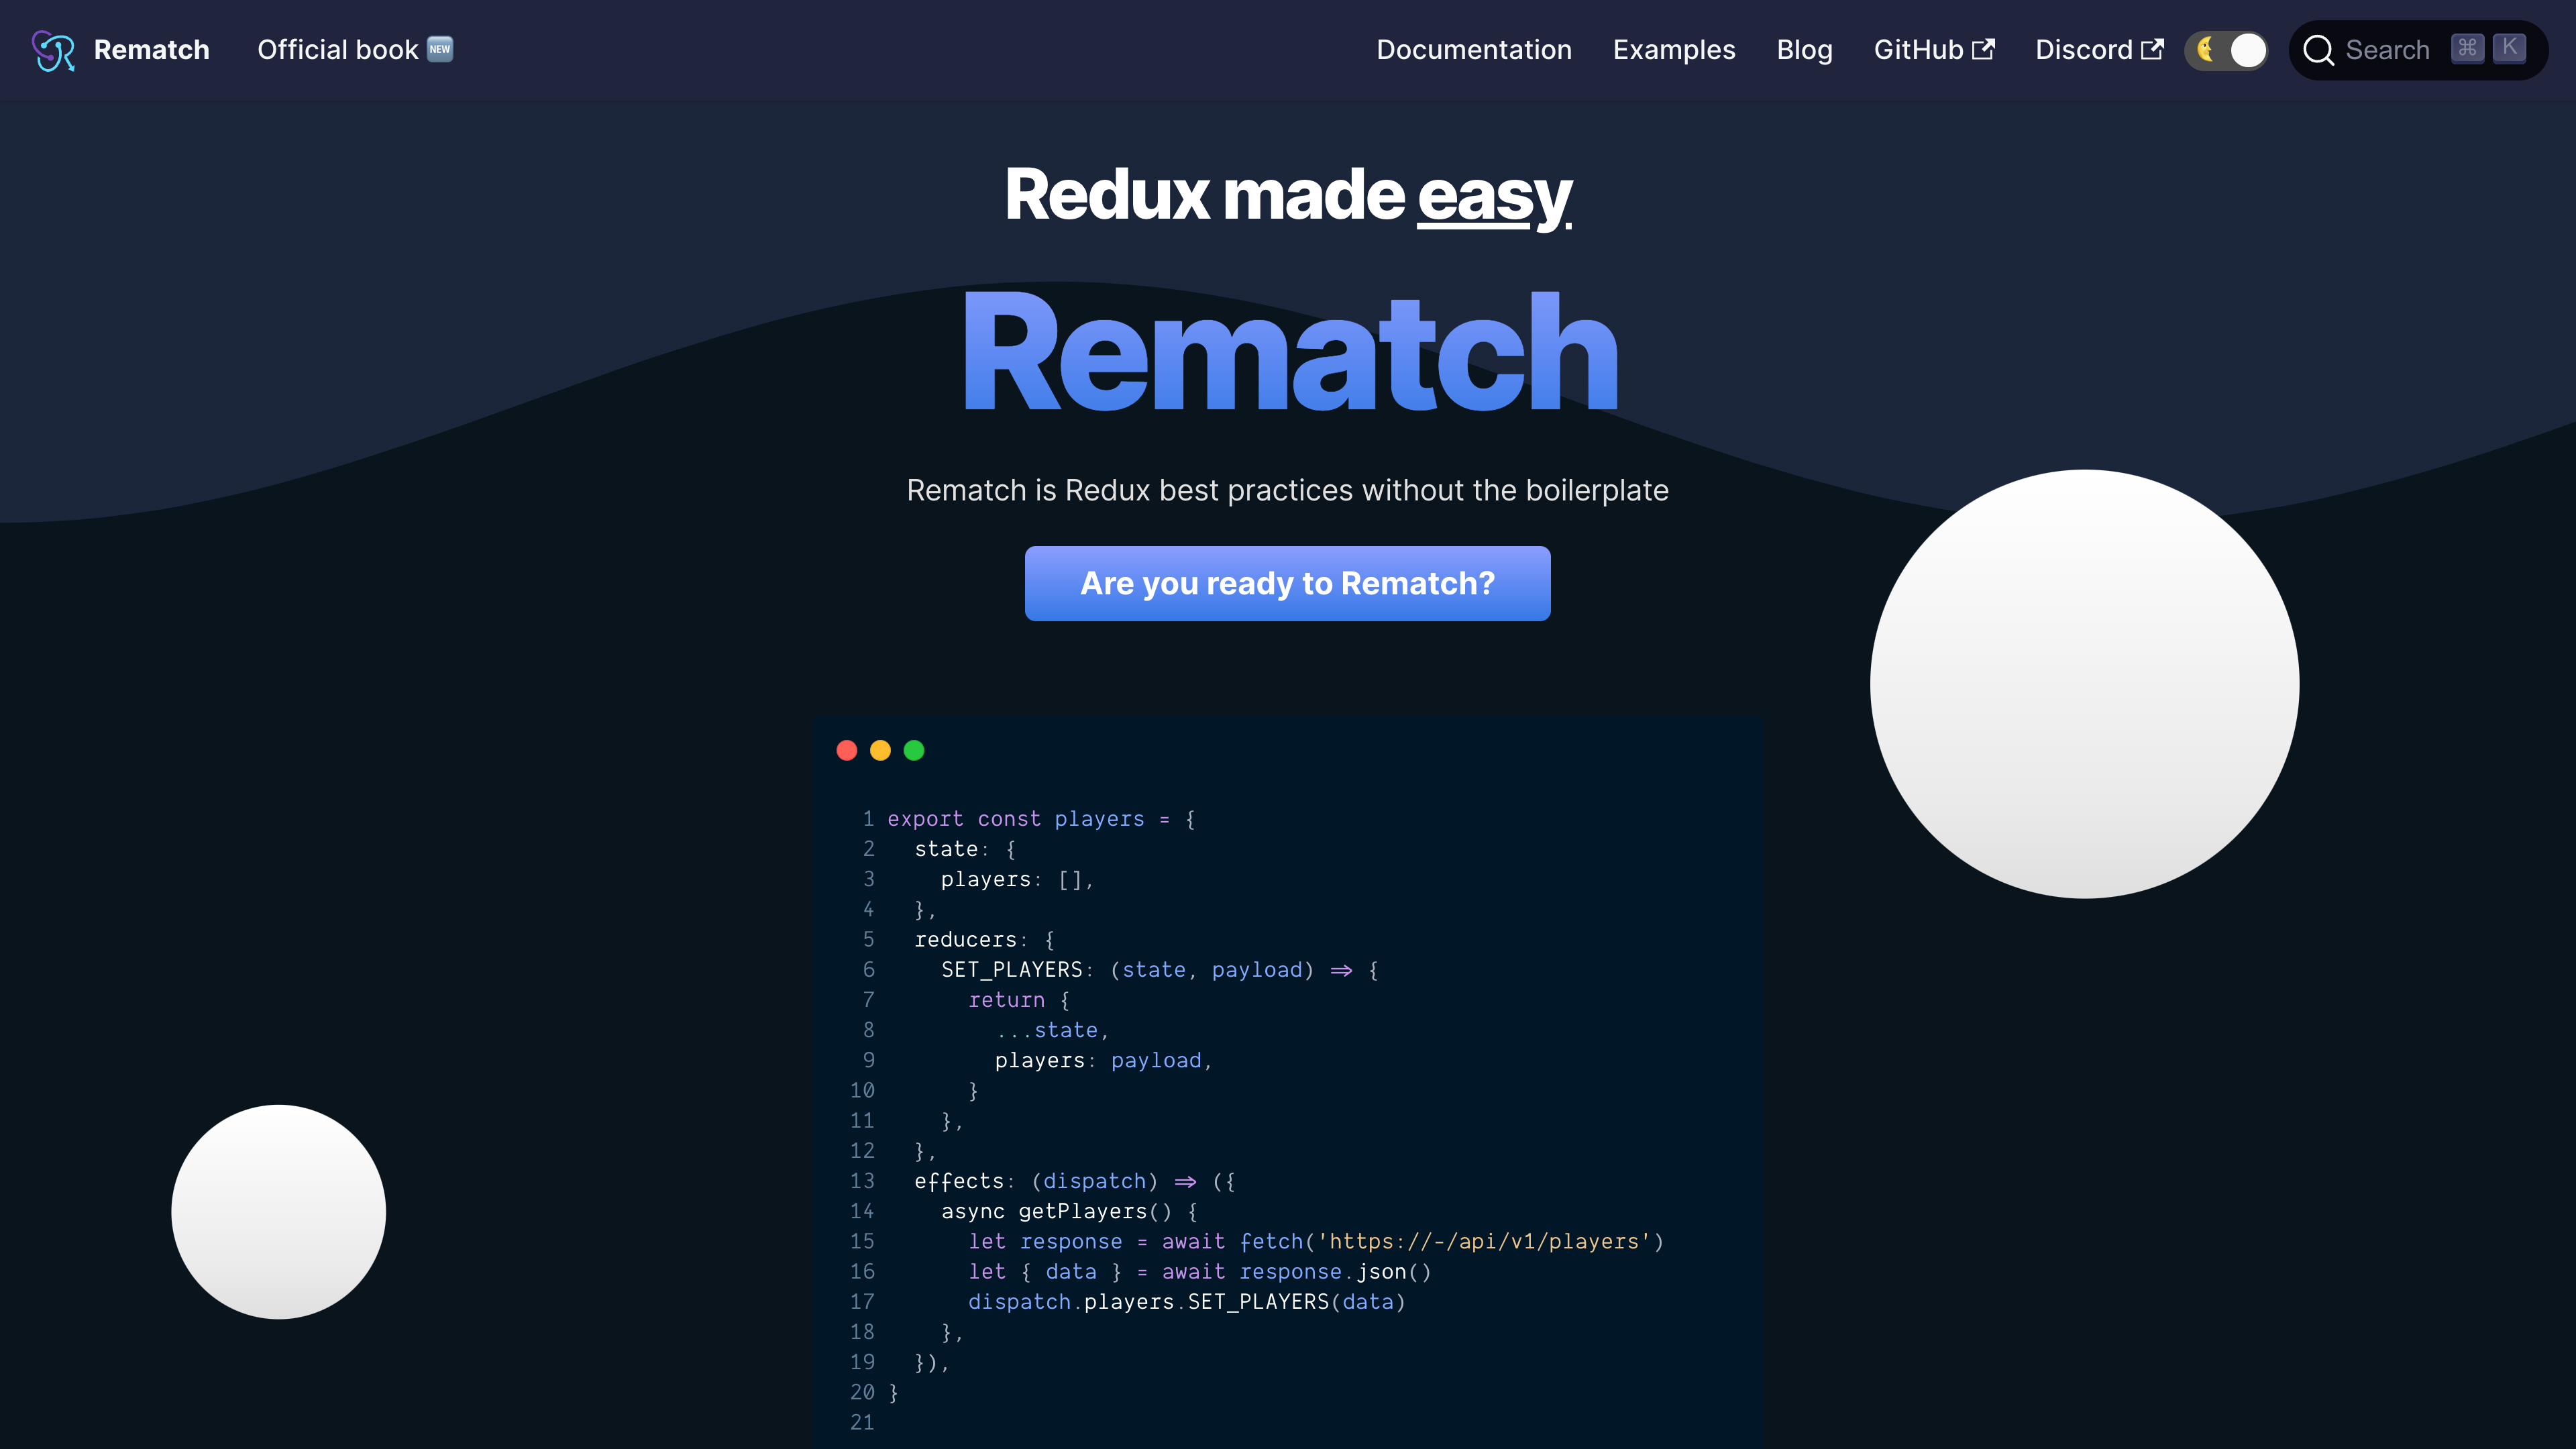 Rematch landing page